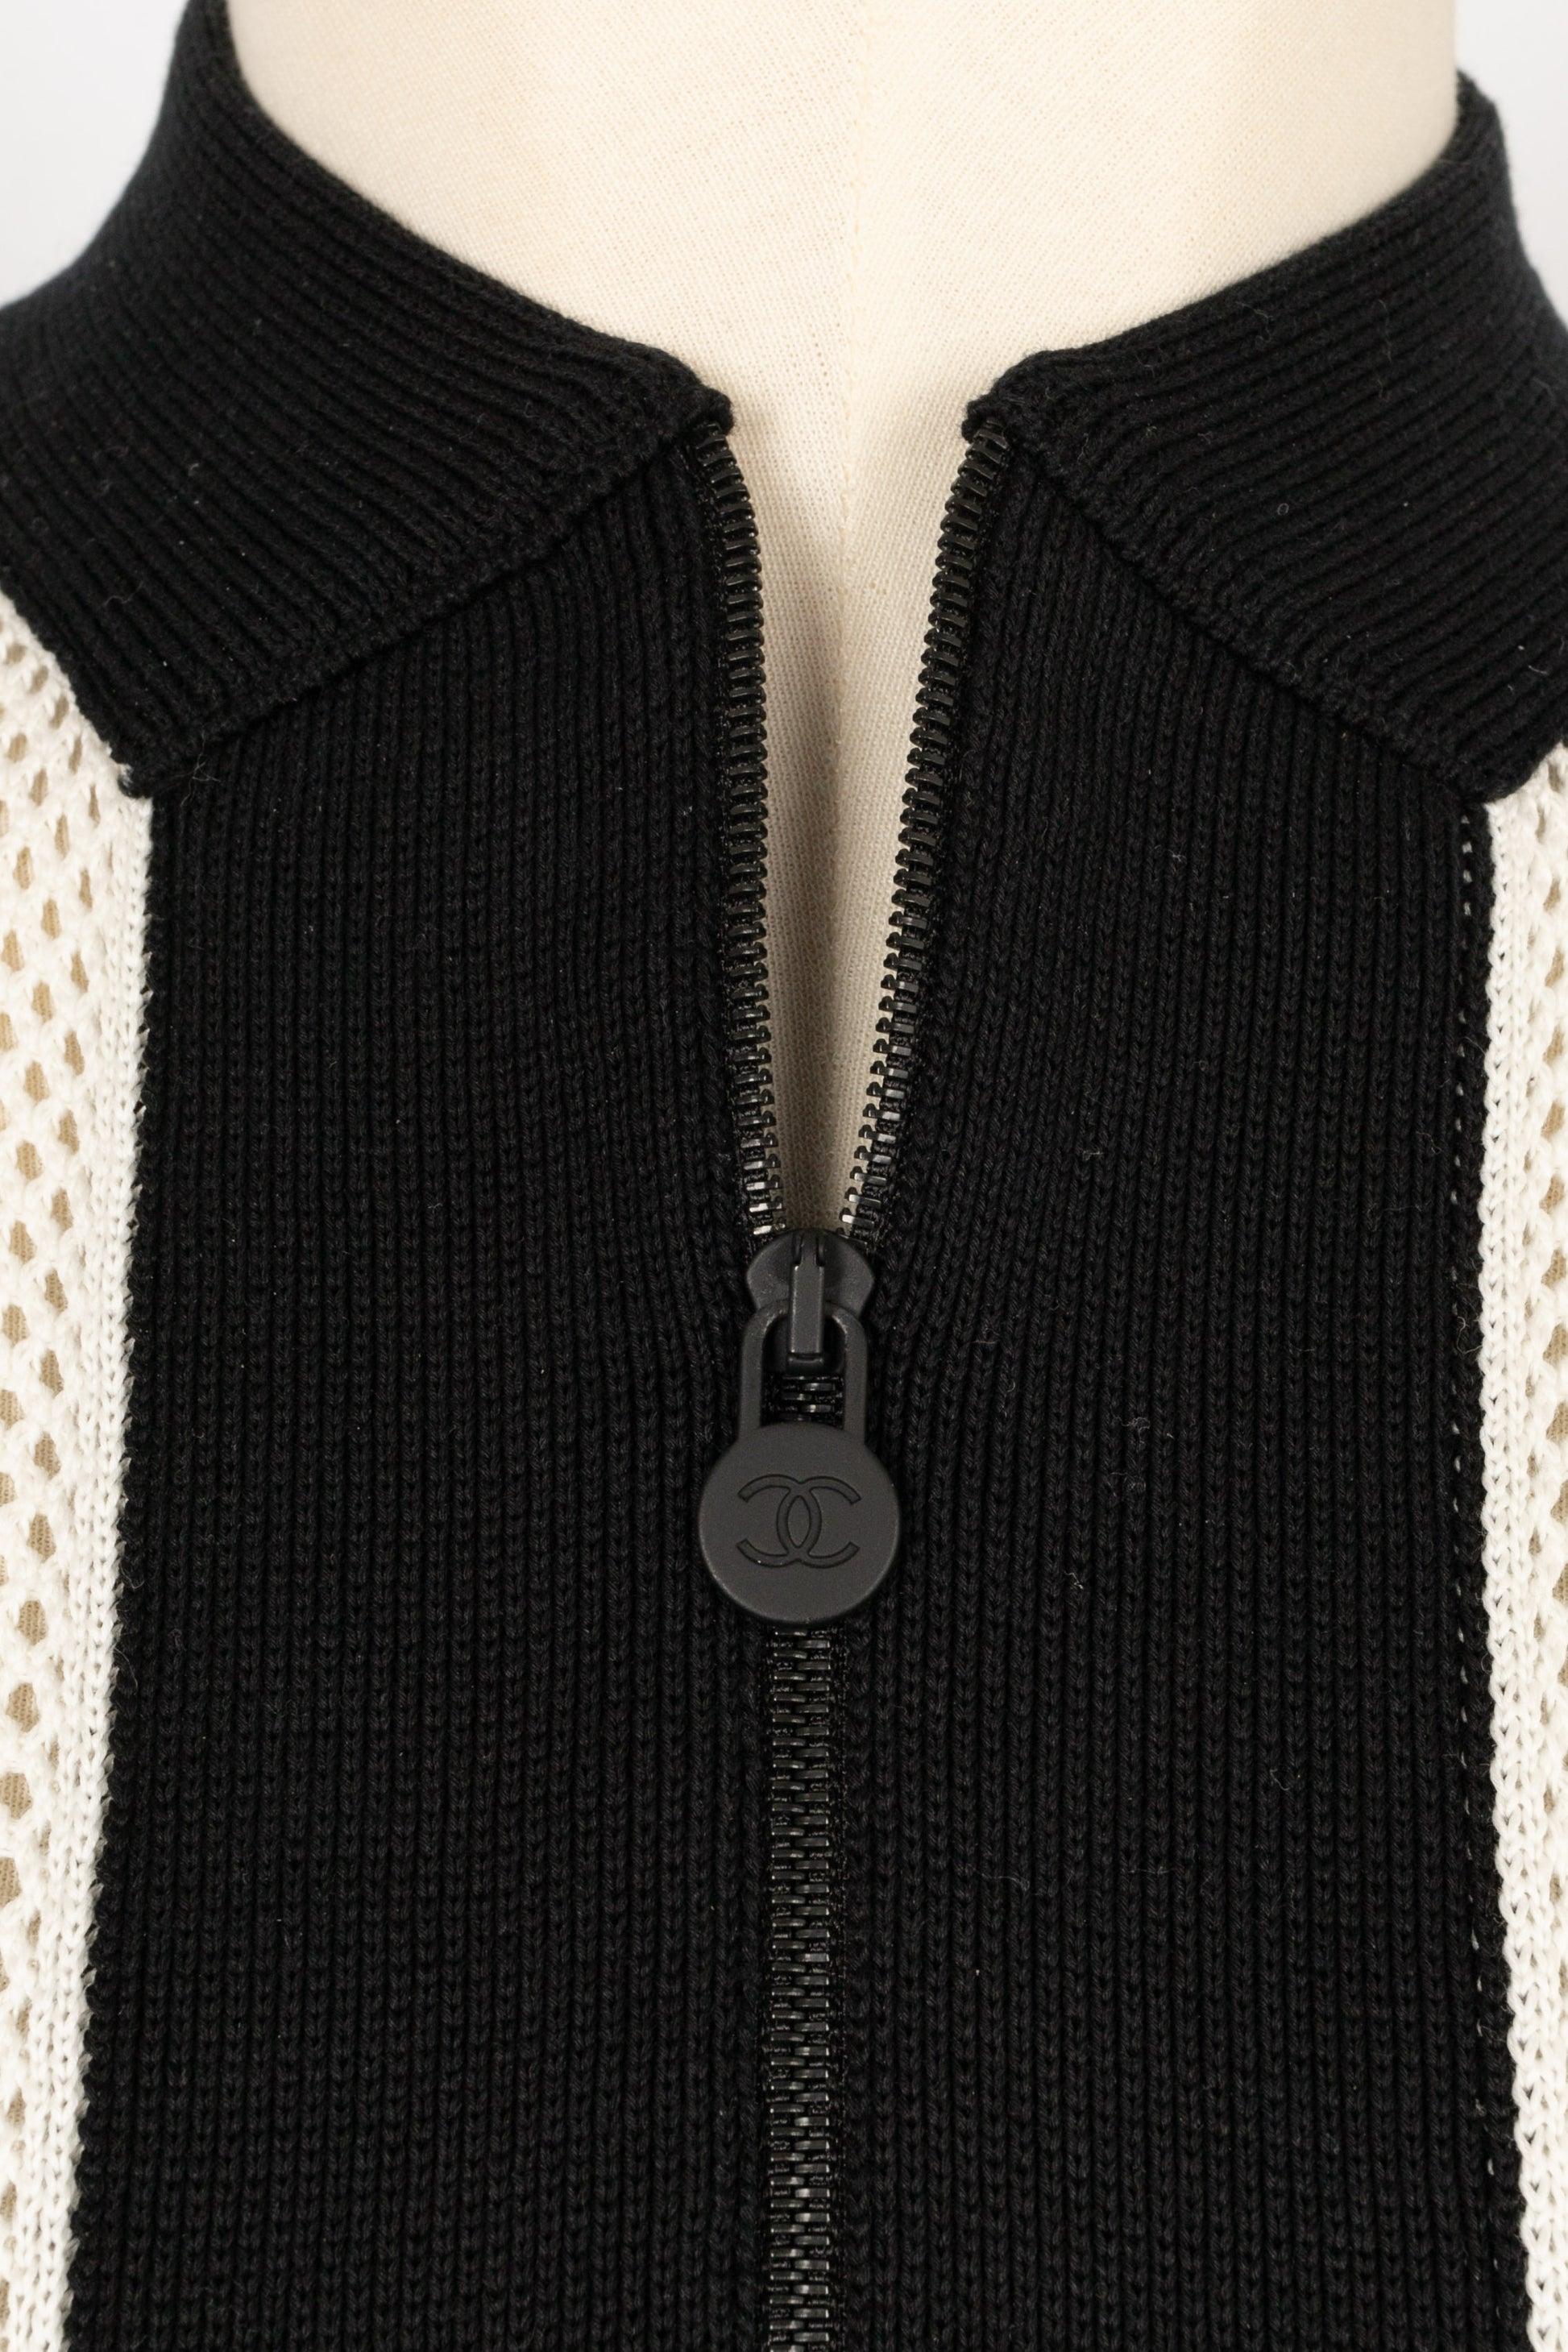 Women's Chanel Jacket-Style Zipped Top in Black and White Mesh For Sale